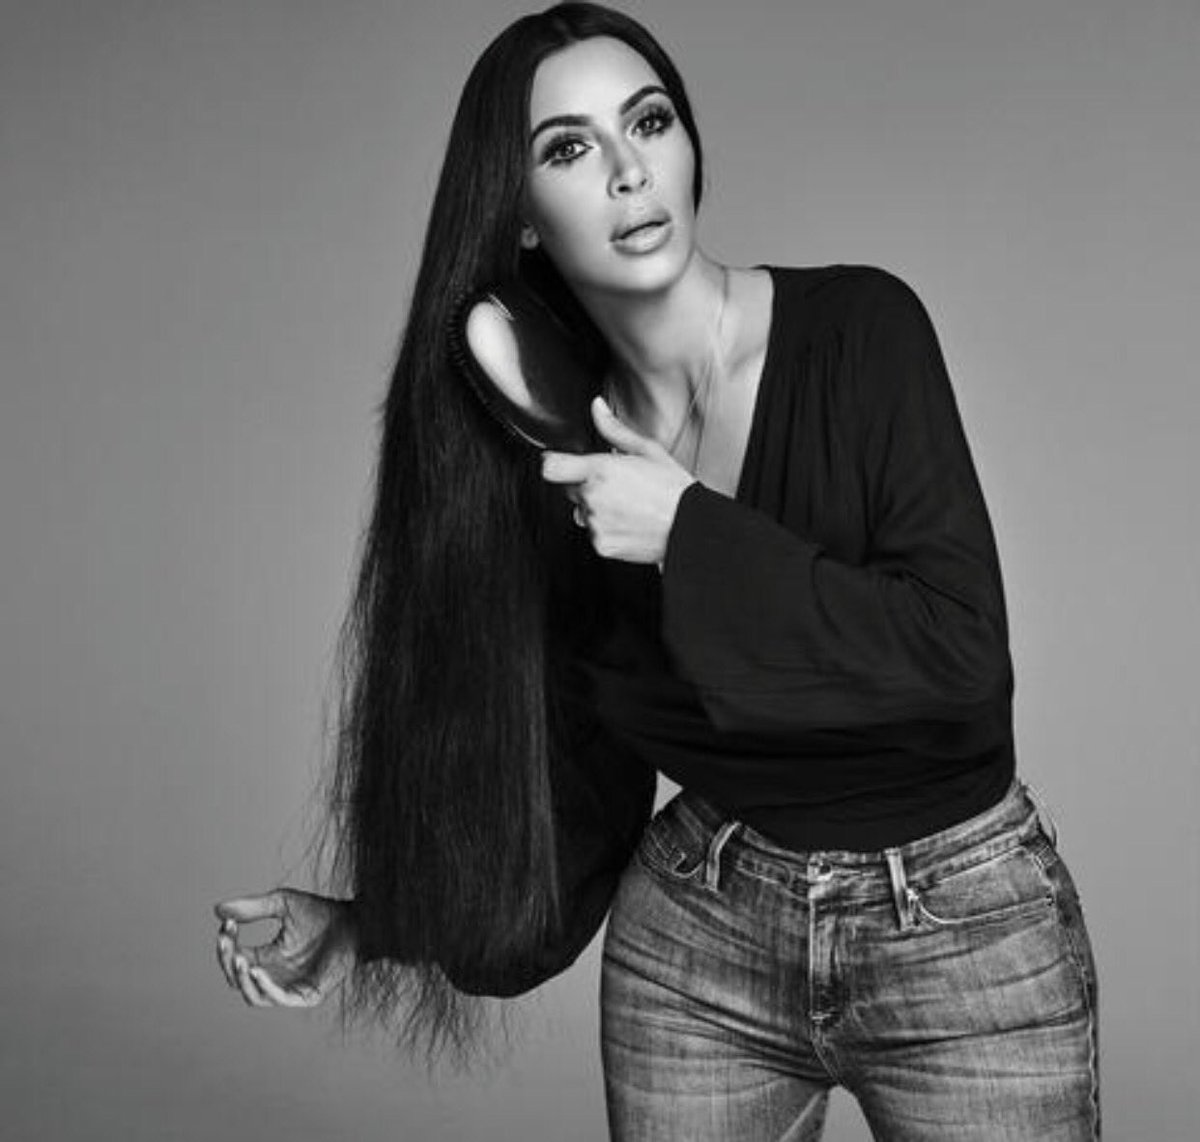 I love this shoot! I am so inspired by my style icon Armenian queen @cher https://t.co/ErwxFlwiKp